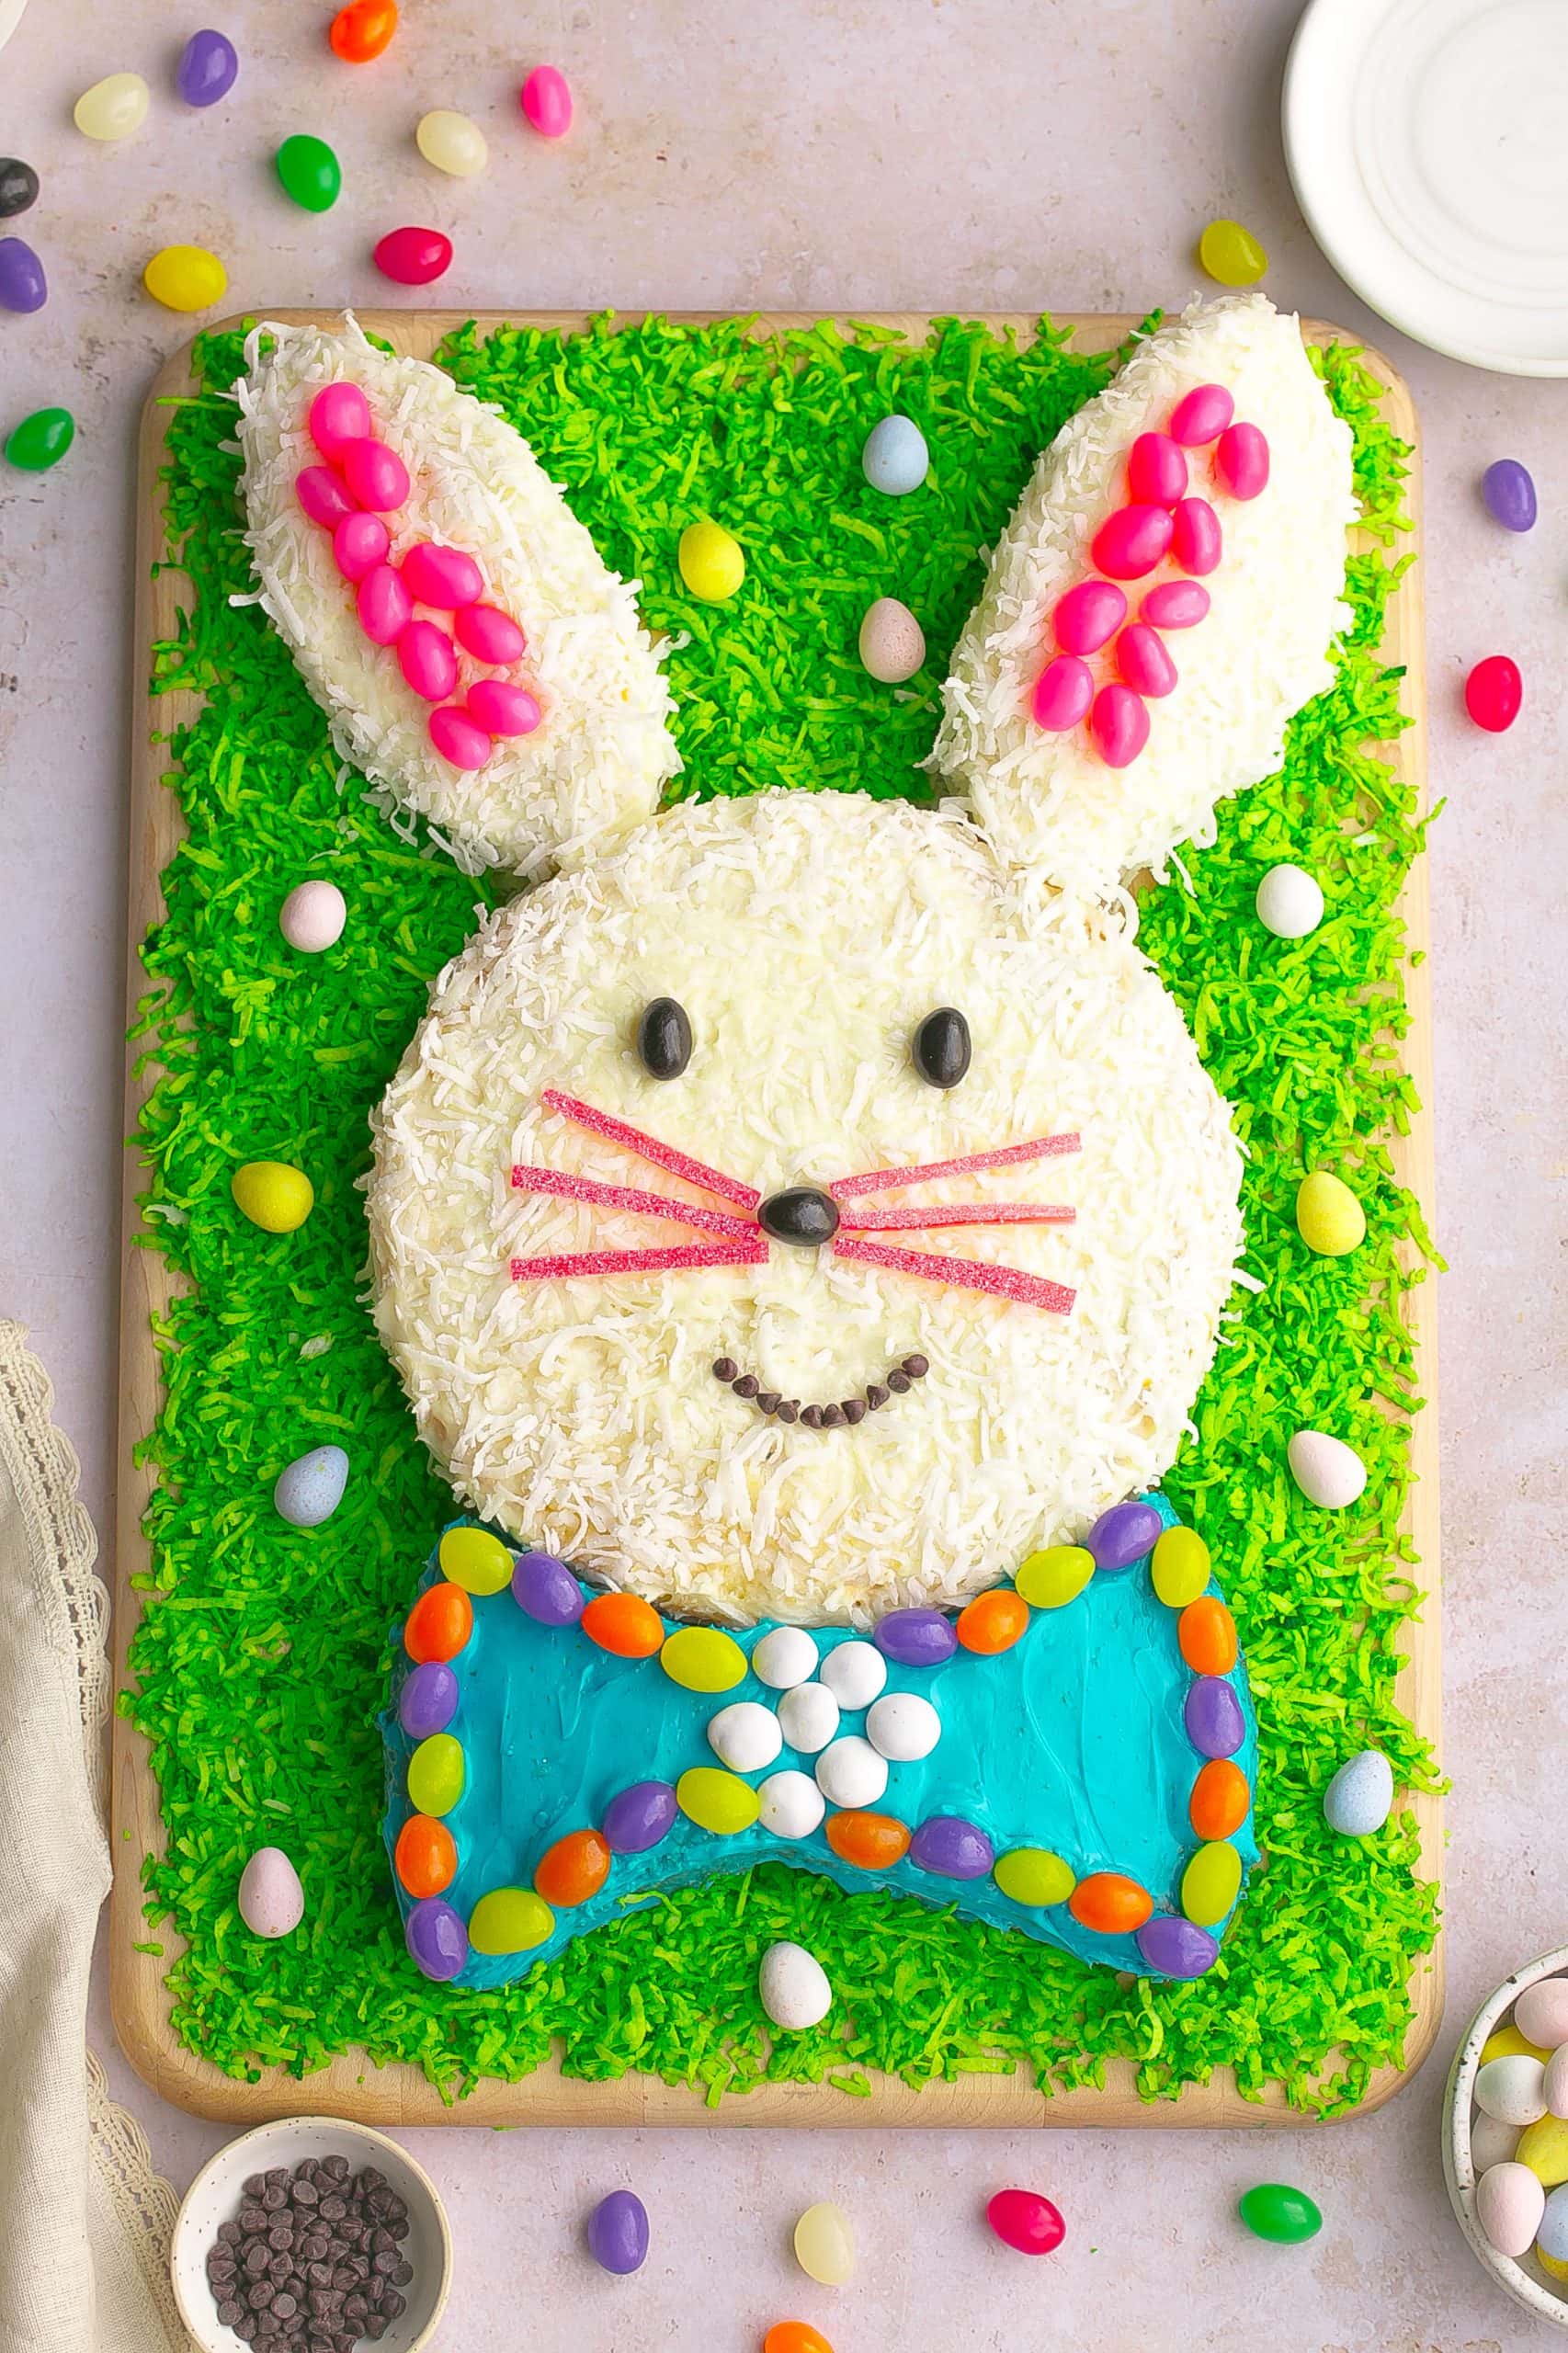 Cute Bunny Cake - For Birthdays, Easter or Just Because! | Feeling Nifty